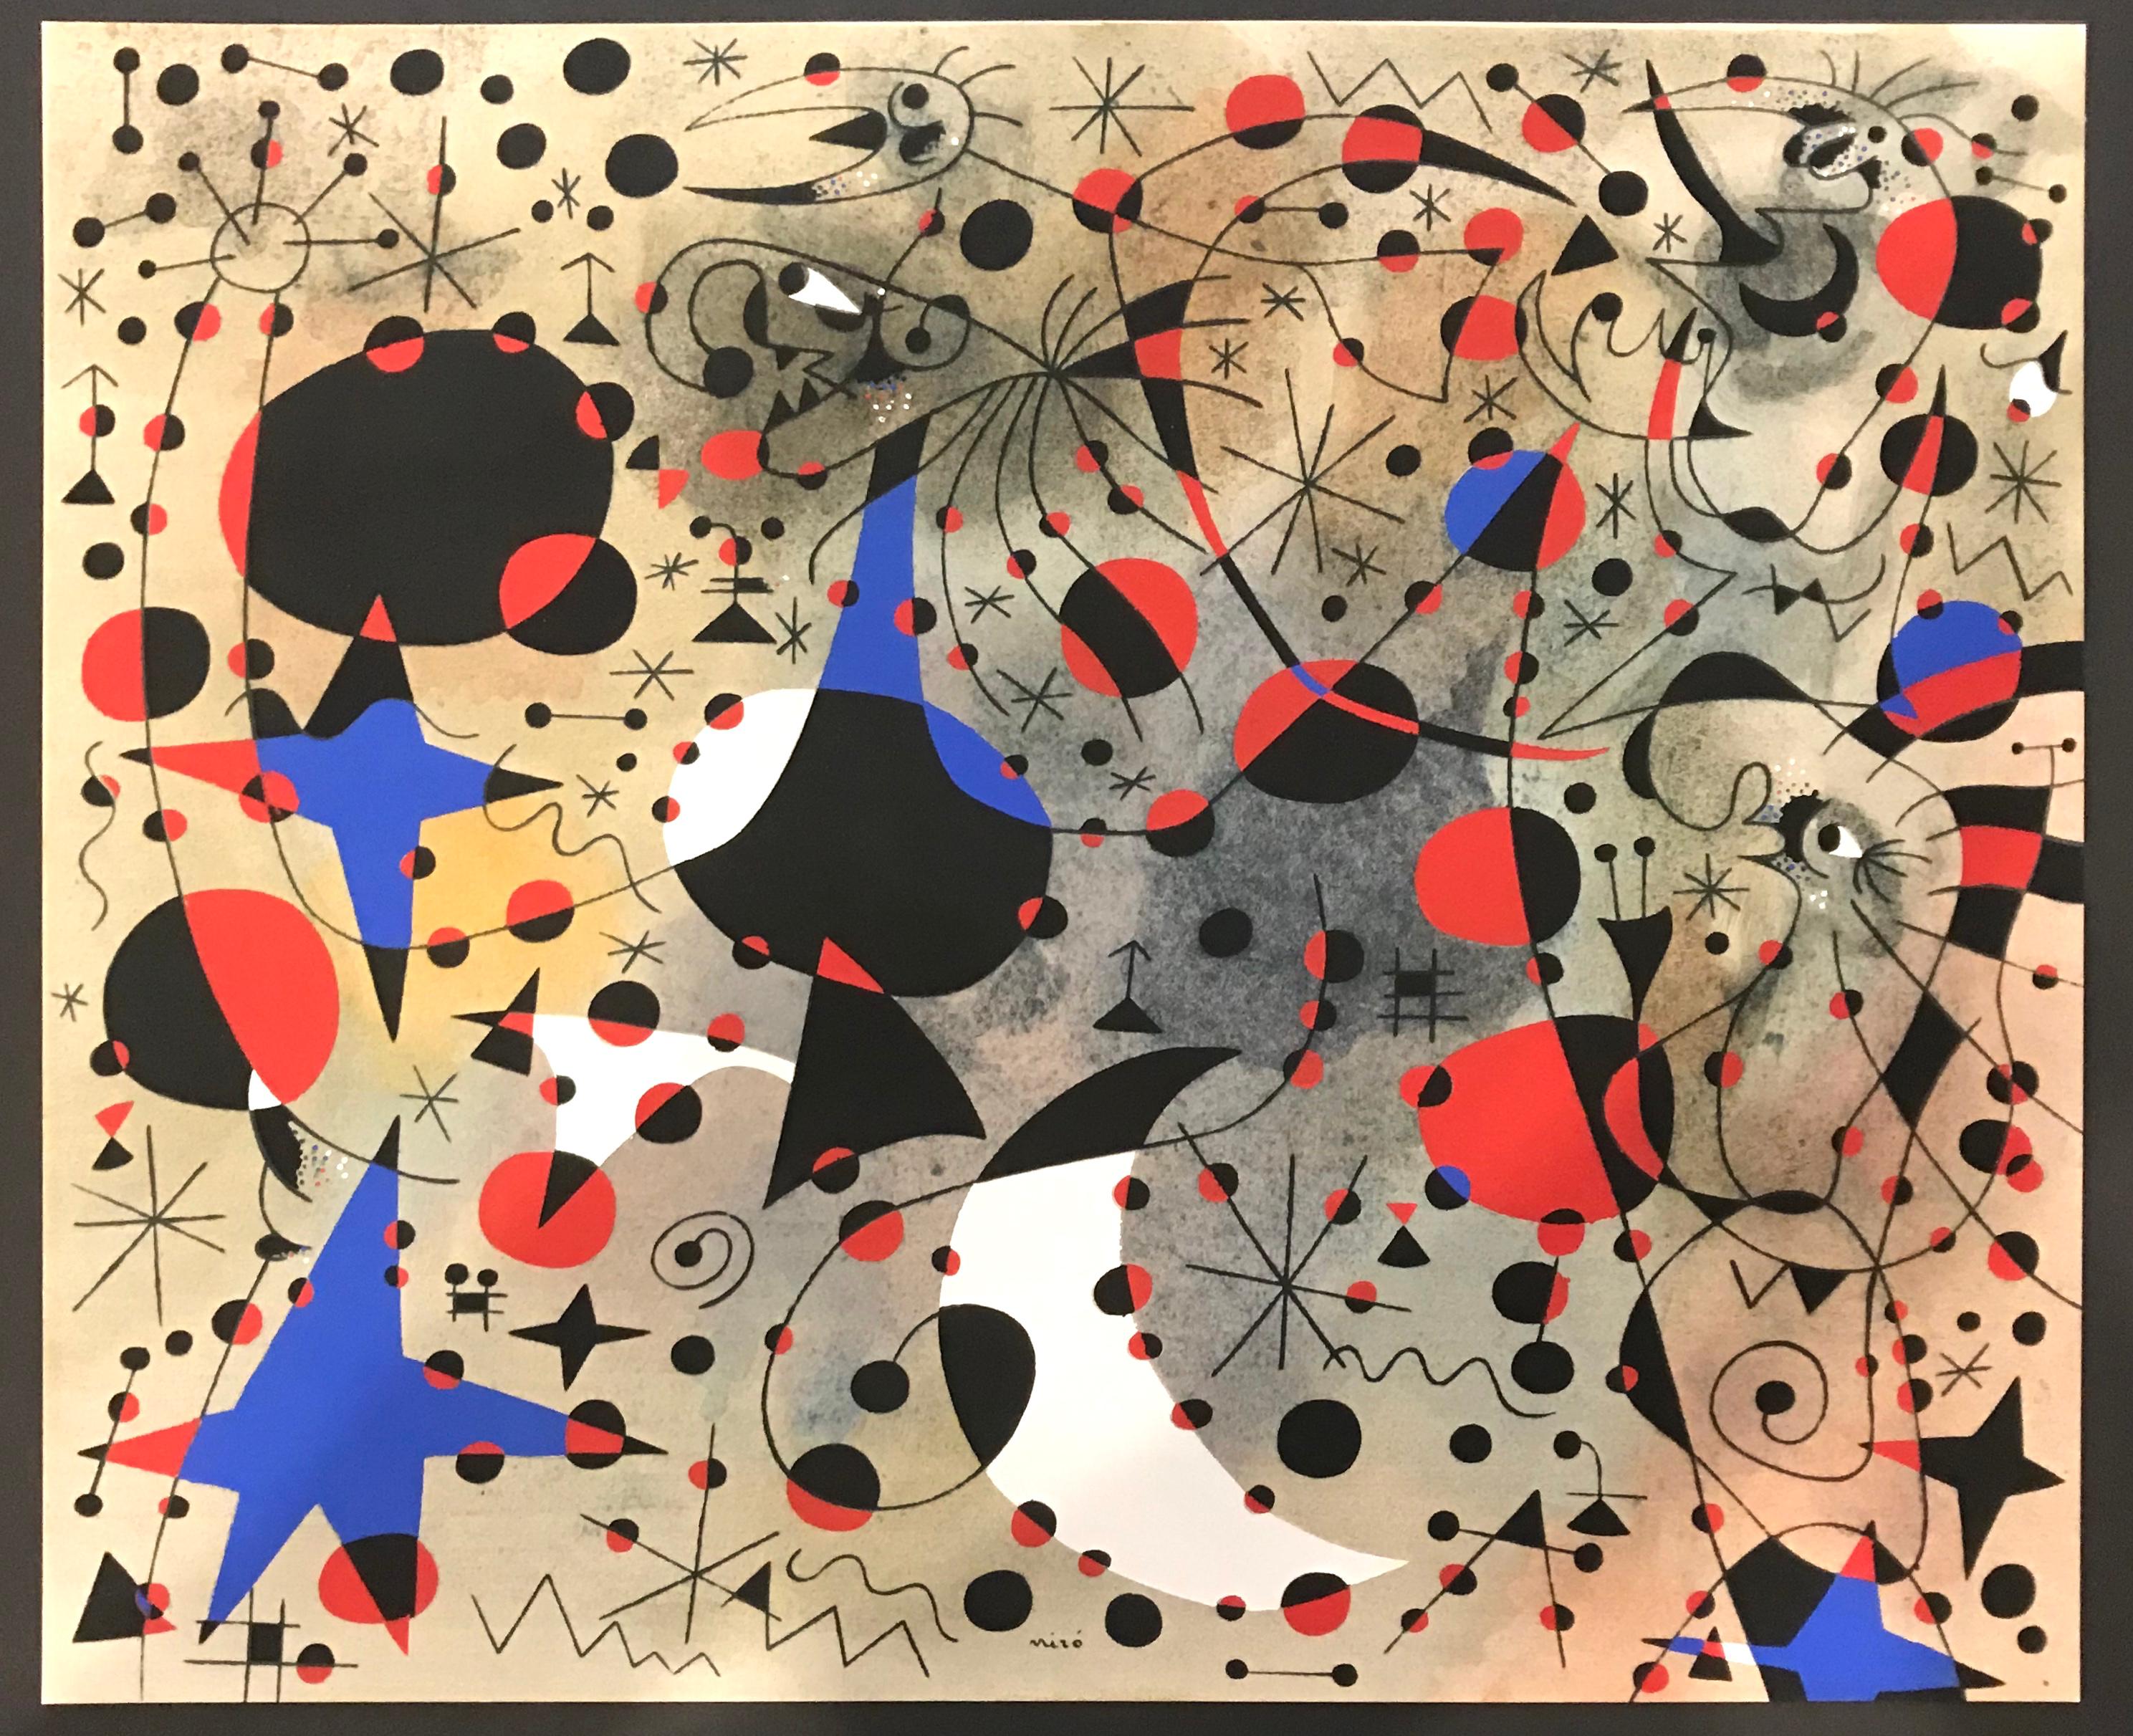 (after) Joan Miró Abstract Print - Le chant du rossignol a minuit et la pluie matinale, from Constellations